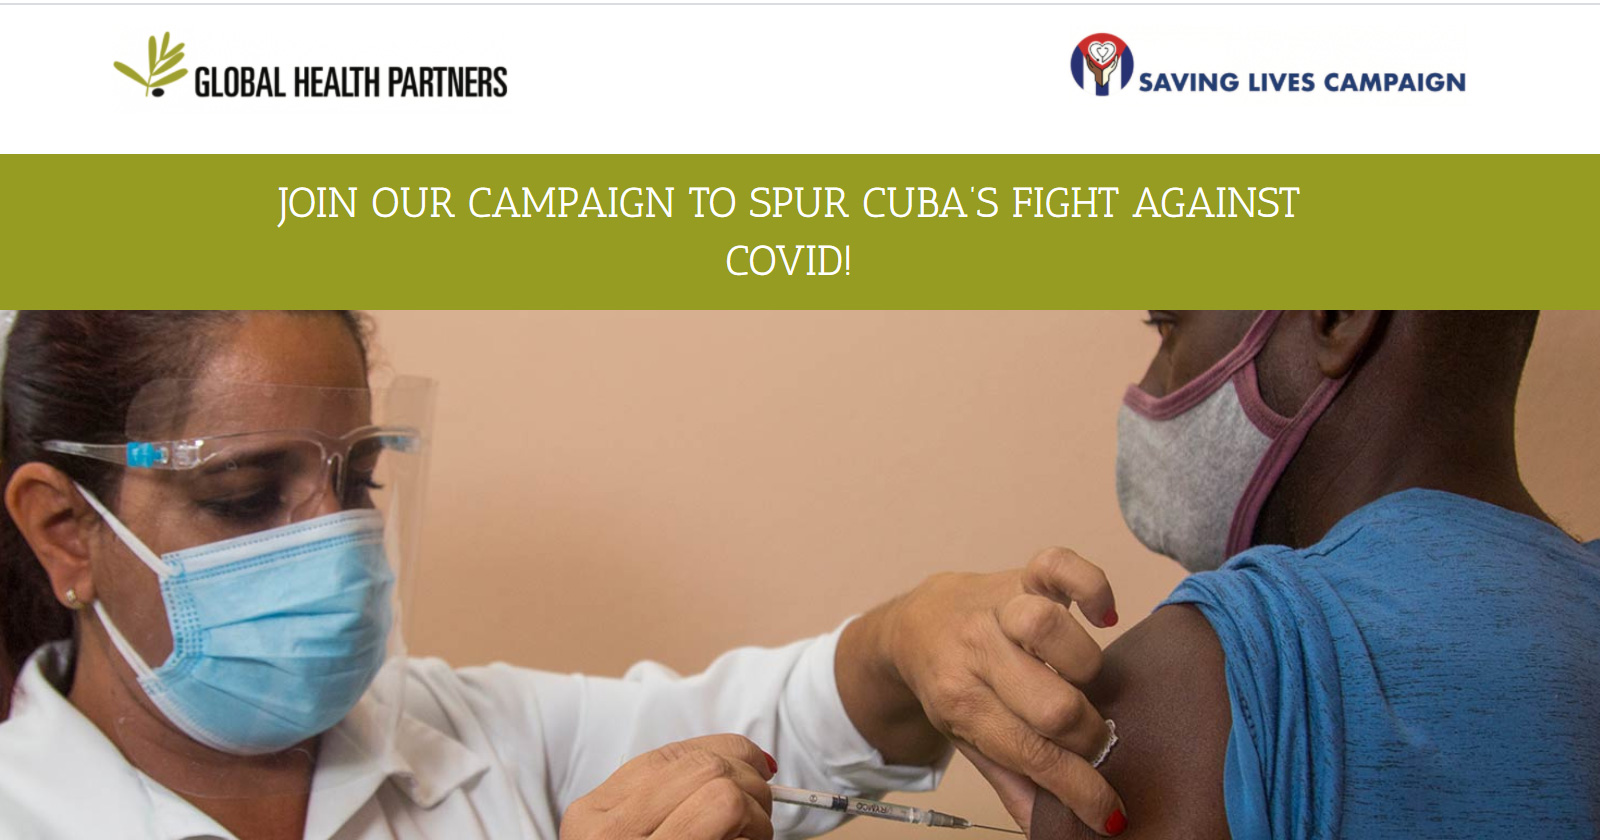 JOIN OUR CAMPAIGN TO SPUR CUBA’S FIGHT AGAINST COVID!